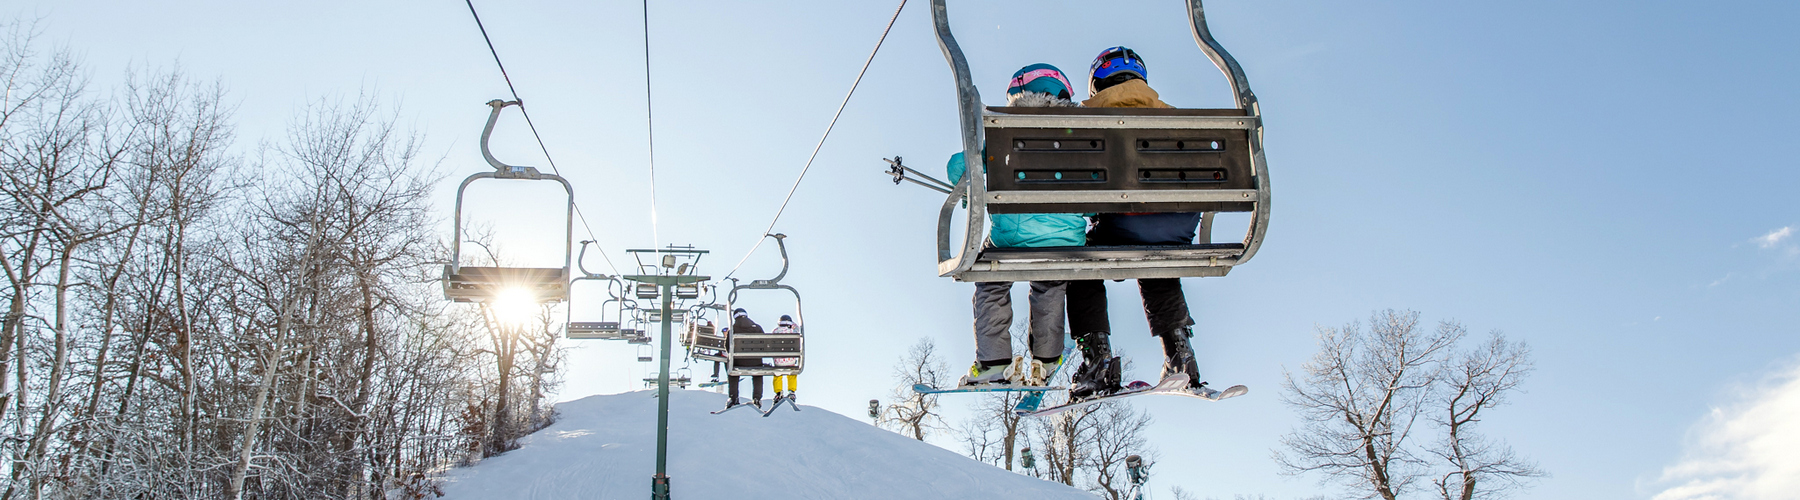 Chairlift at The Mountain Top